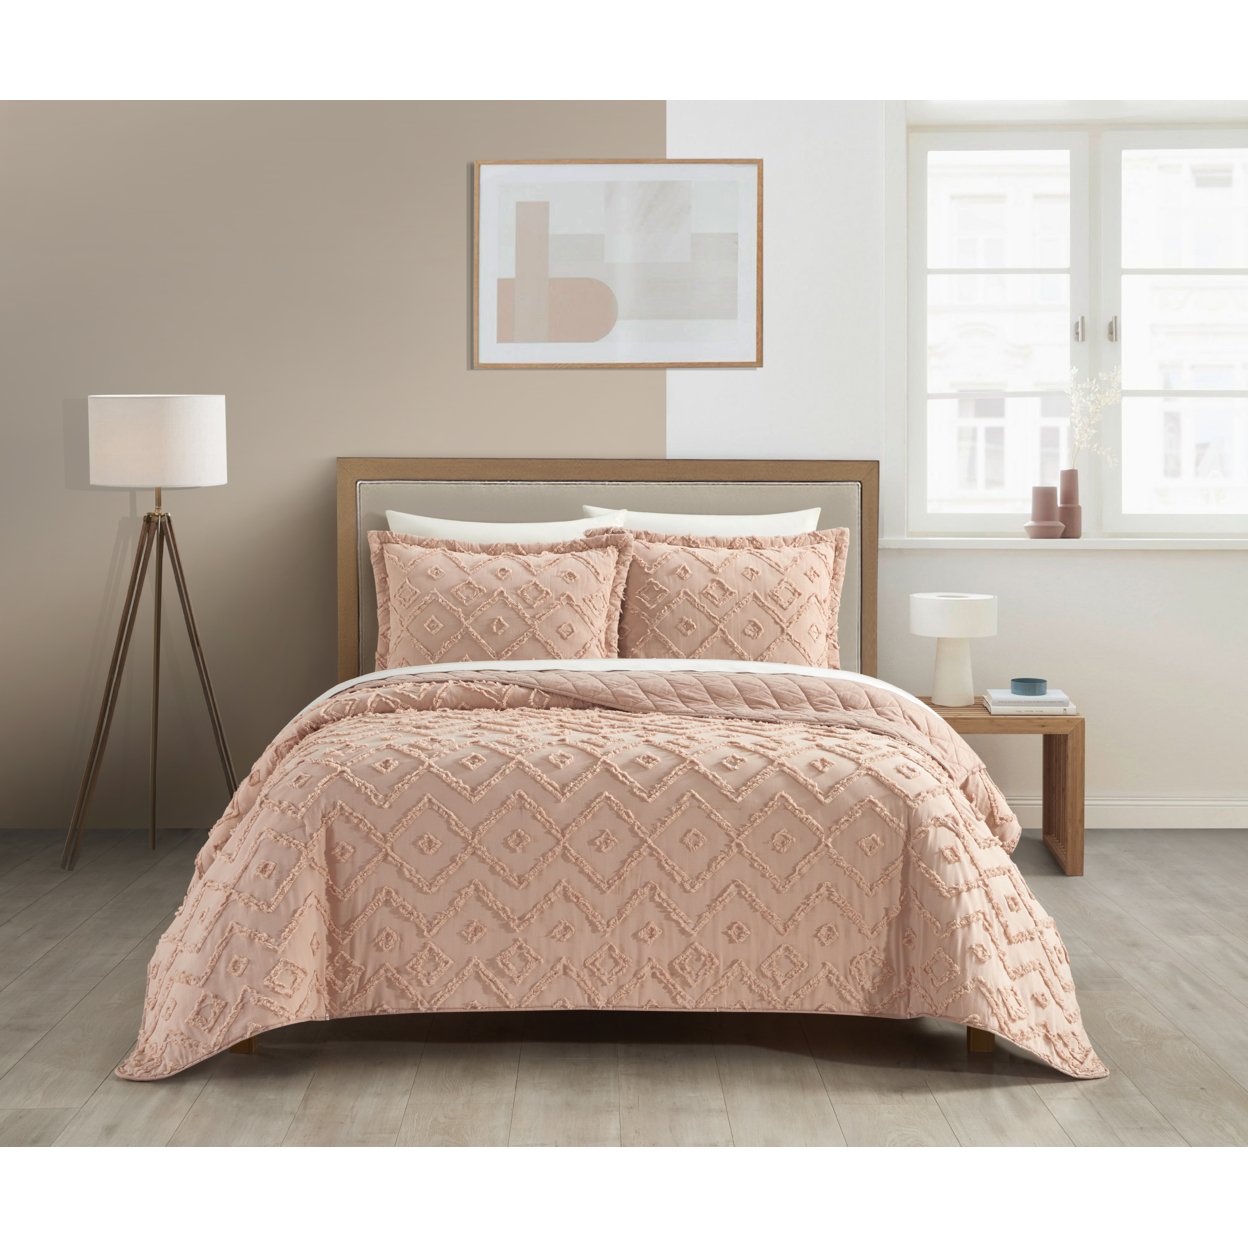 NY&C Home Dody 3 Piece Cotton Quilt Set Clip Jacquard Geometric Pattern Bedding - Dusty Rose, Queen